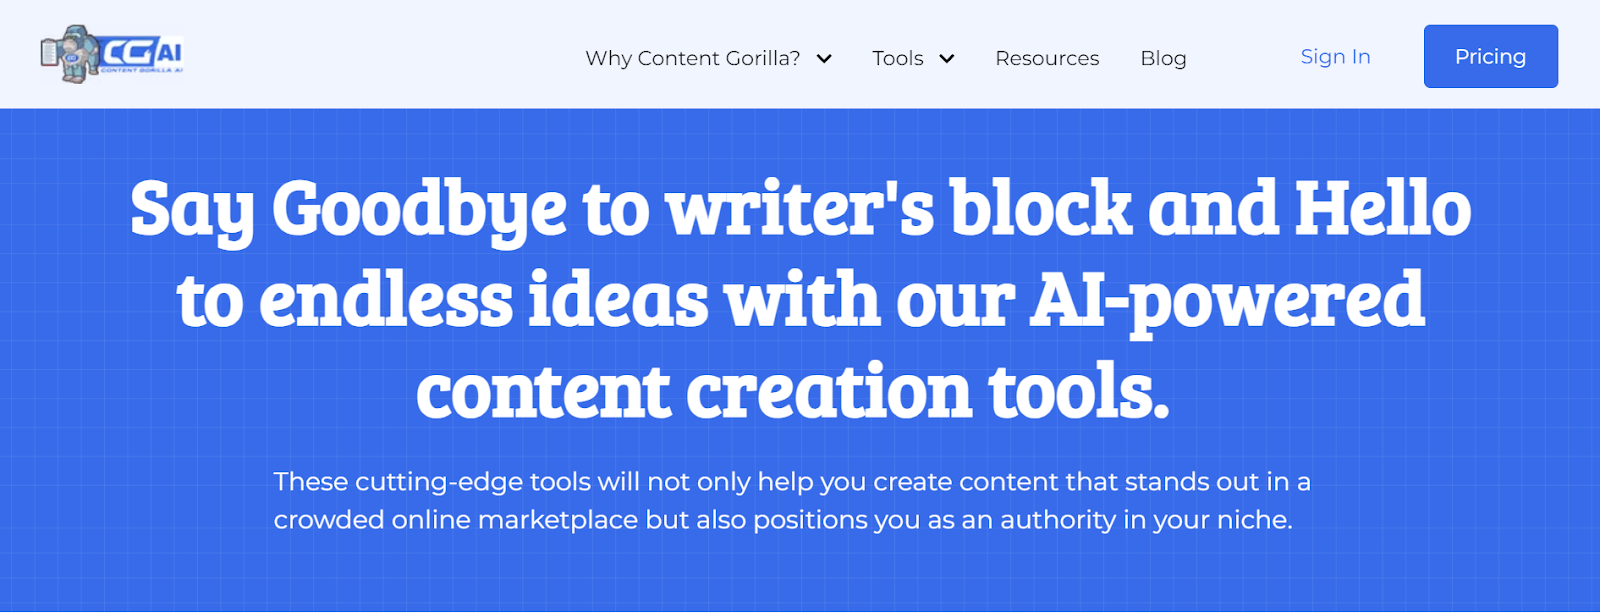 Content Gorilla's AI-powered Free Tools for Content Writing